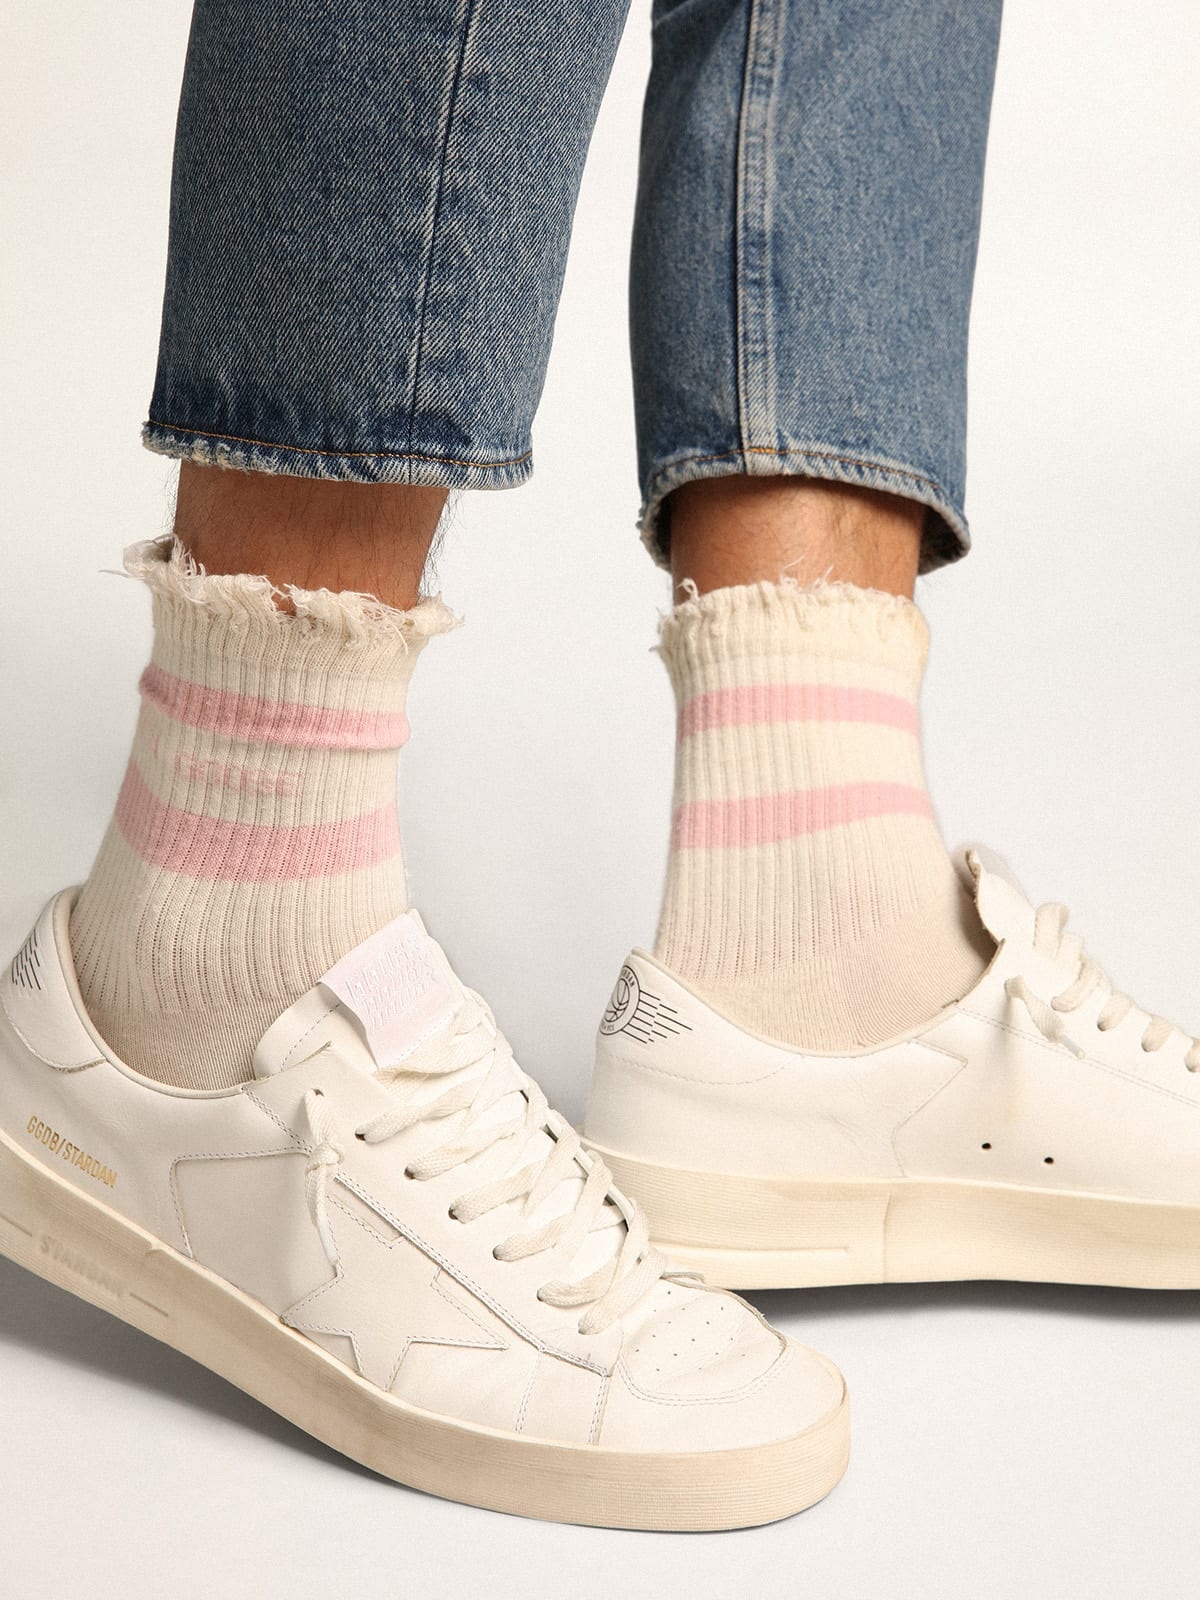 Distressed-finish white socks with baby-pink logo and stripes - 4